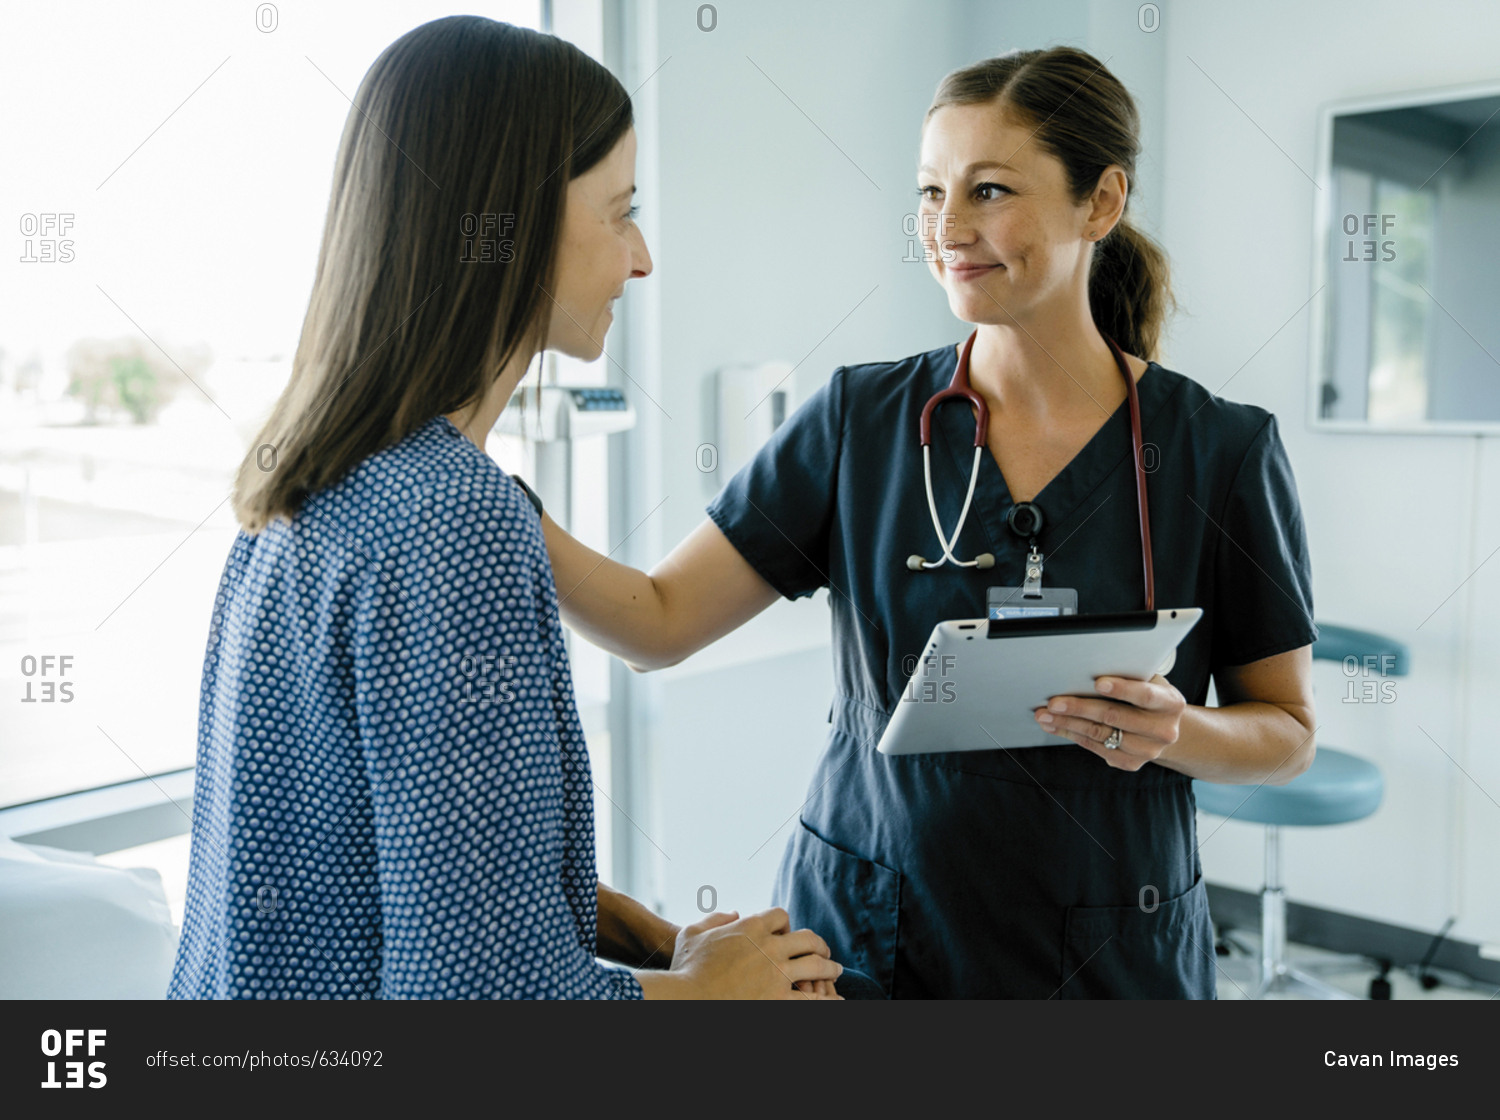 Female doctor consoling woman while holding tablet computer in medical examination room